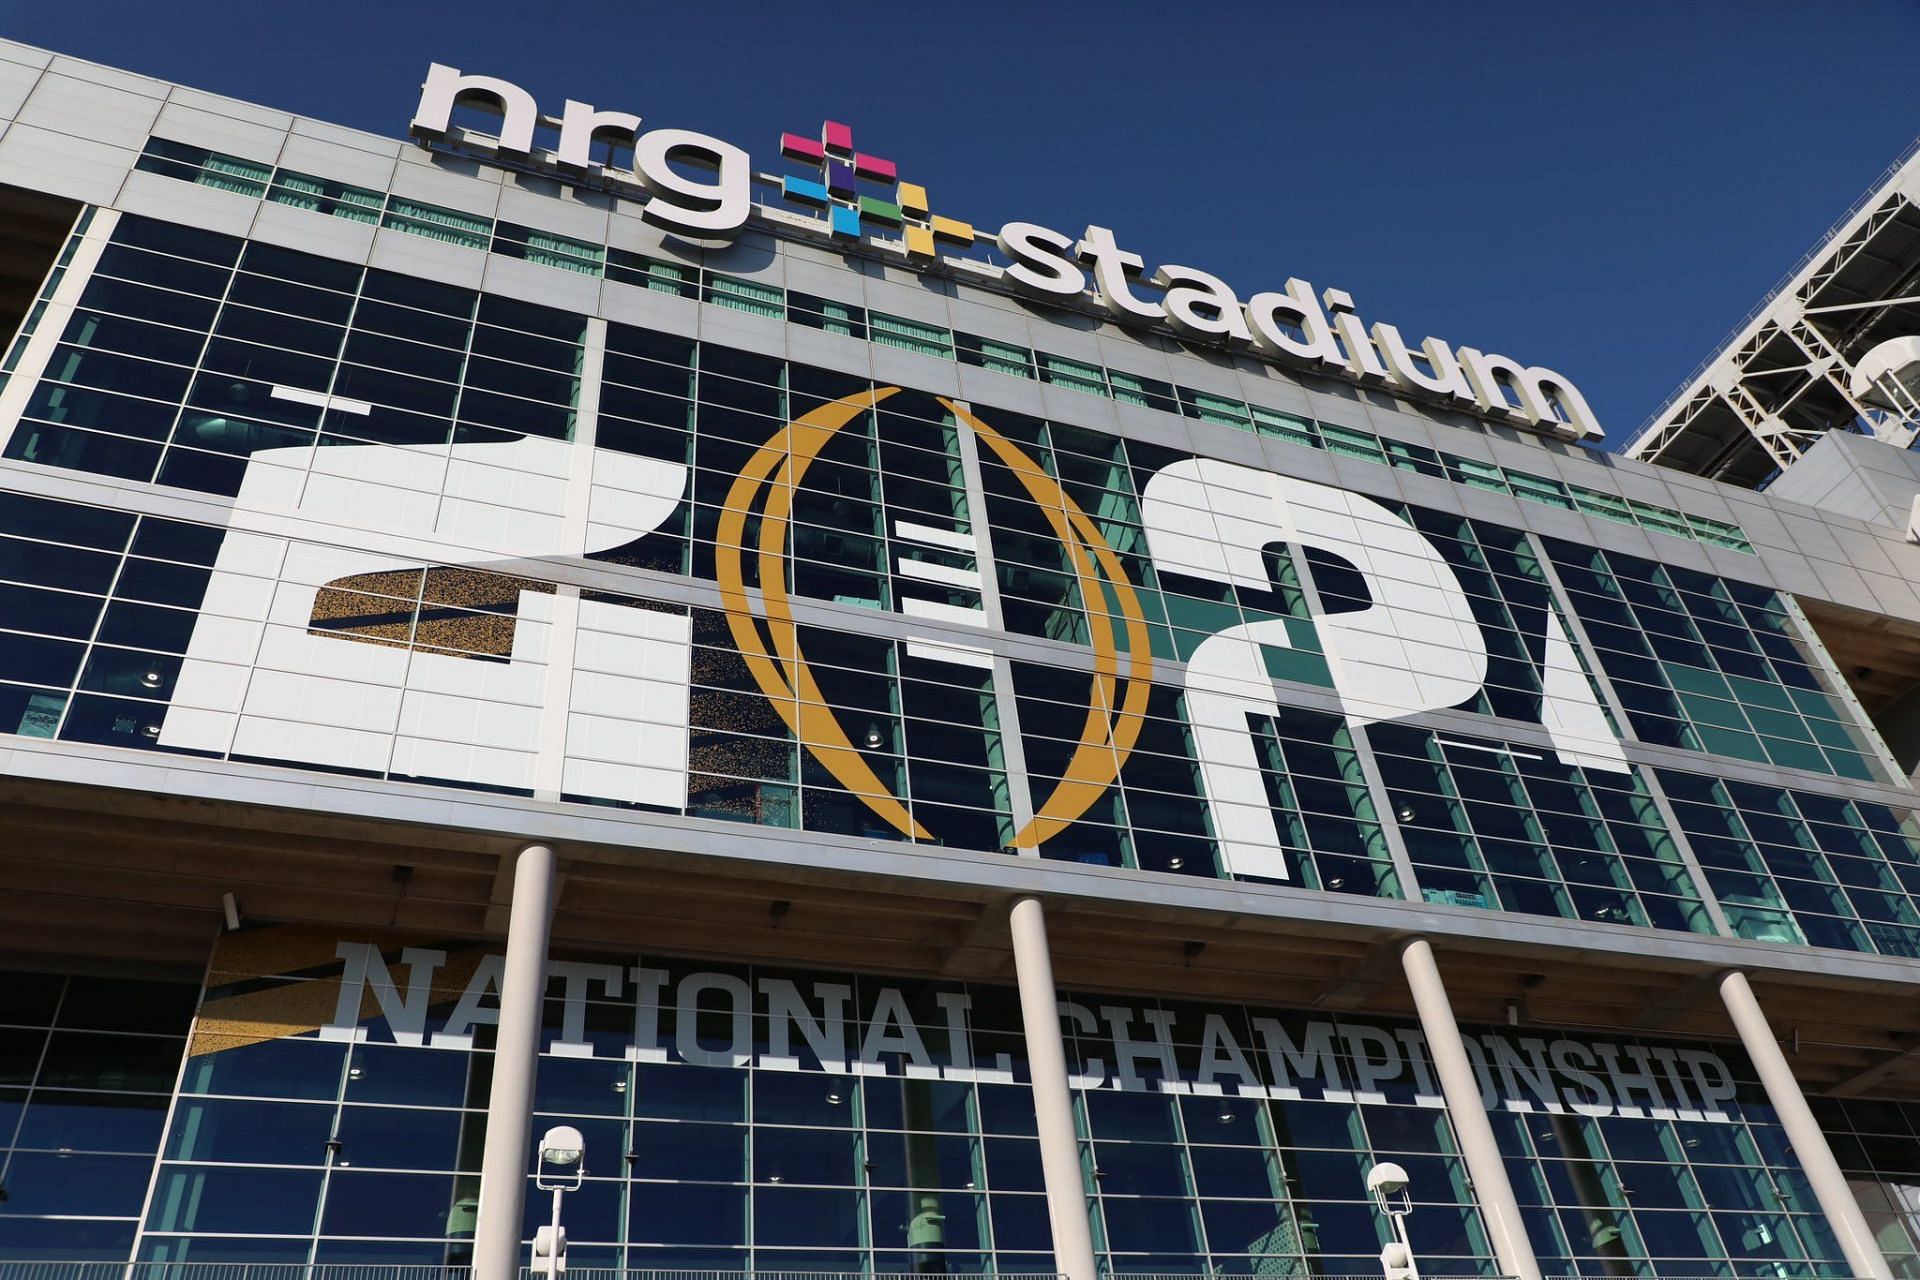 CFP National Championship Alcohol and Bag Policy What do we know about